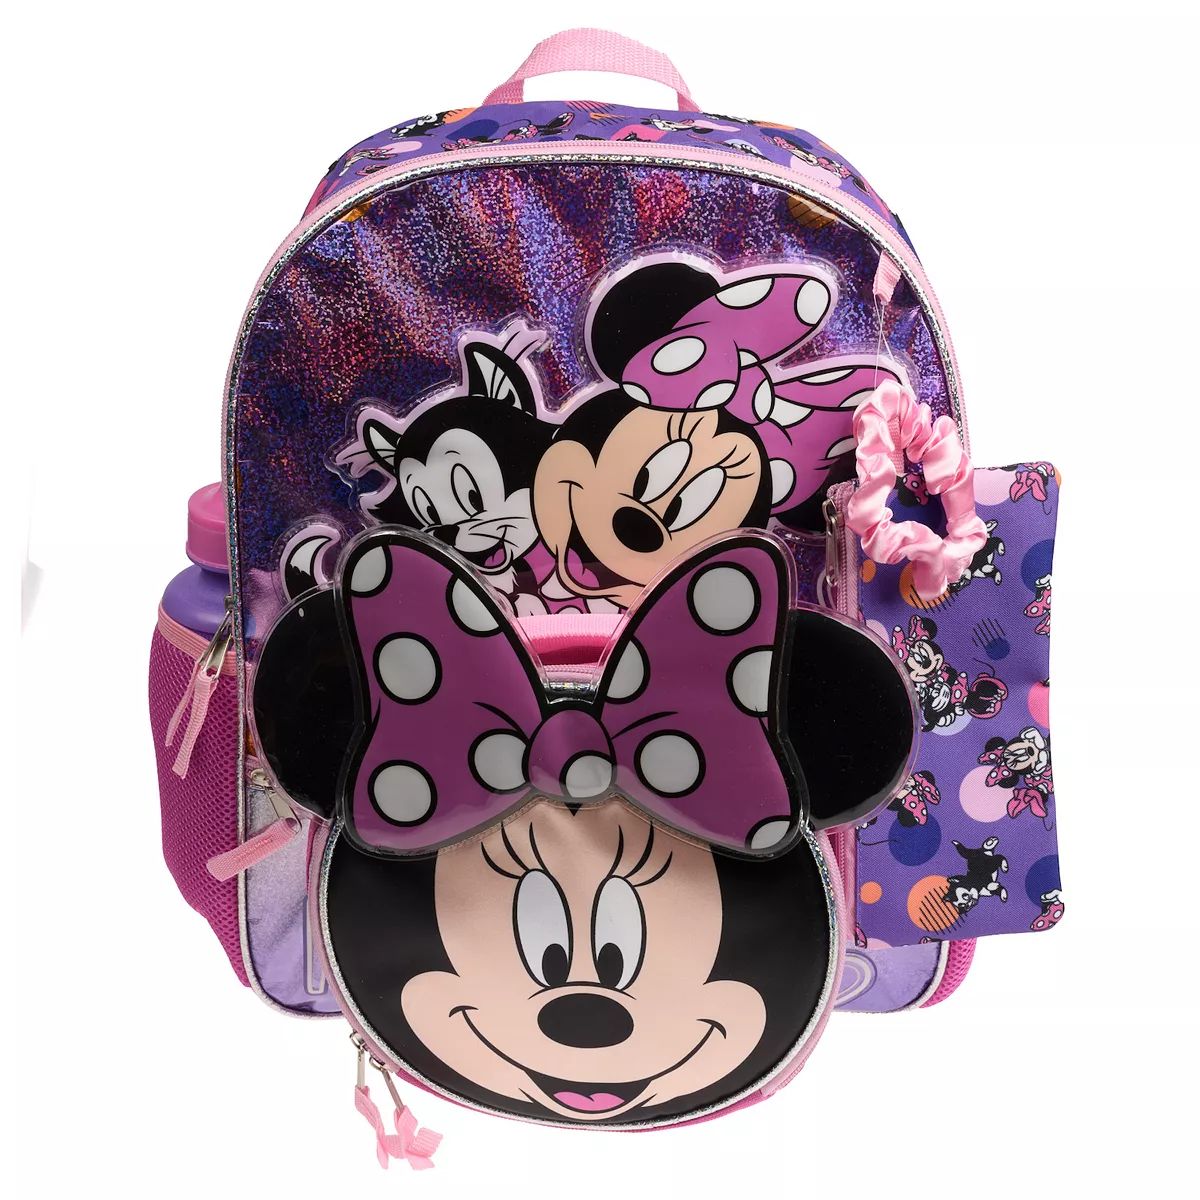 Disney's Minnie Mouse 5-Piece Backpack & Lunch Bag Set | Kohl's